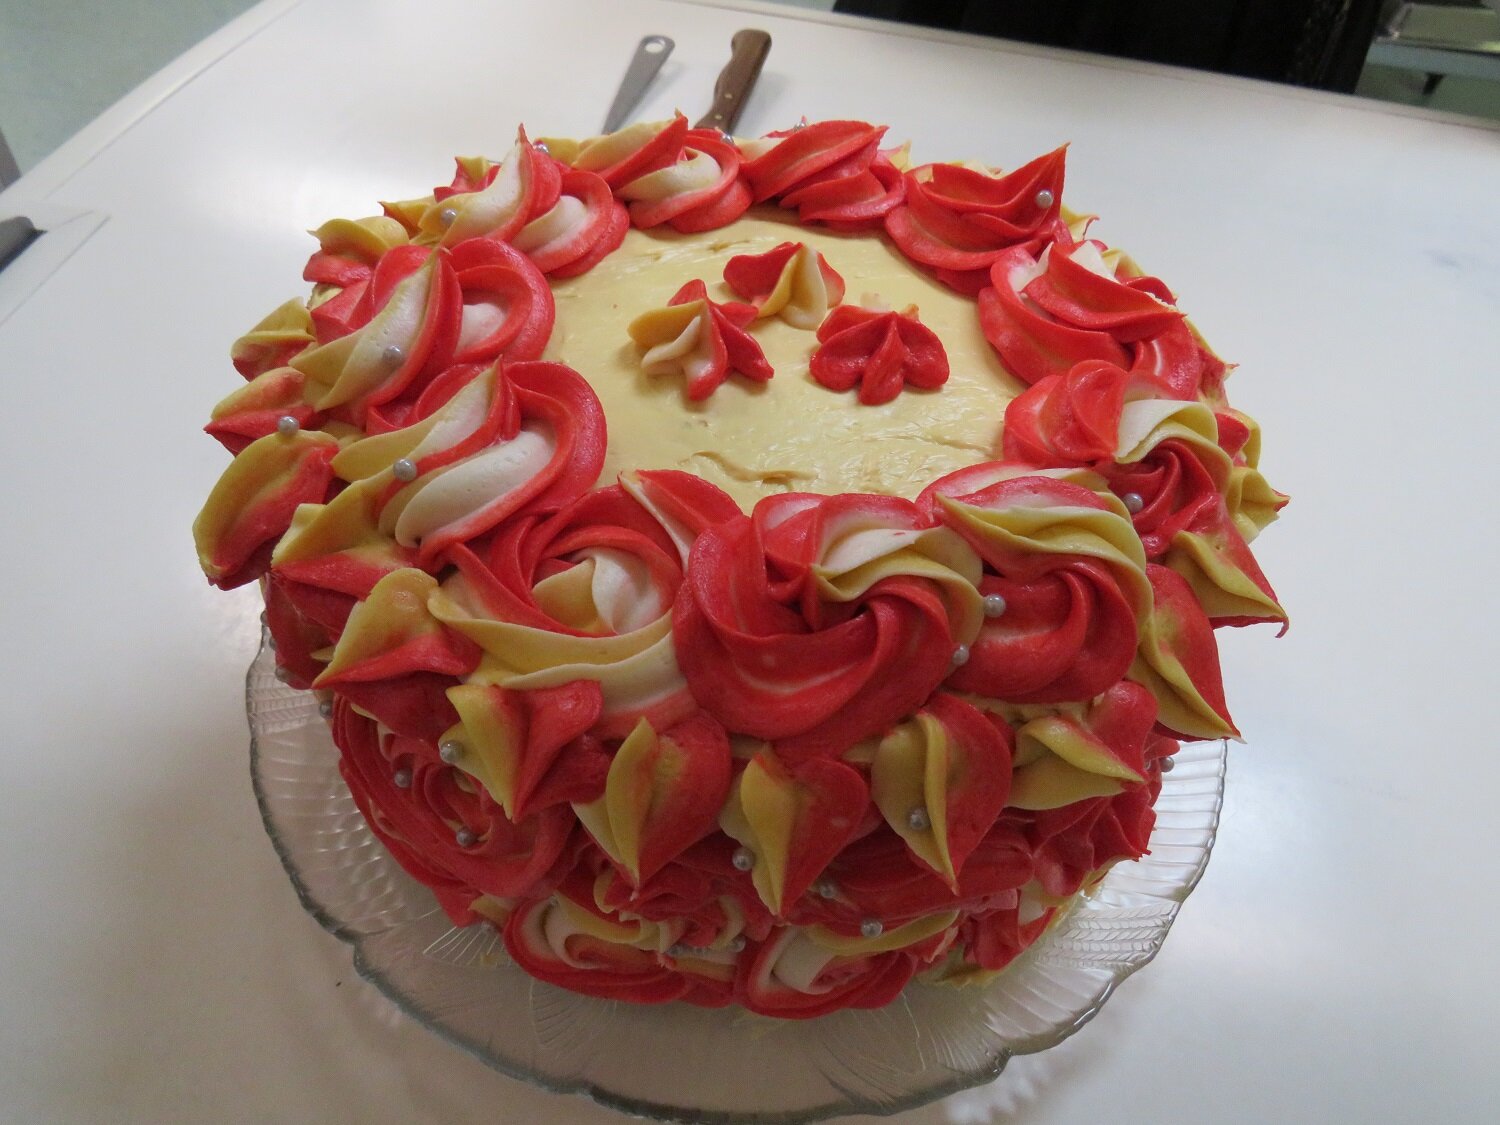  A glorious rose-themed cake for Our Lady of the Rosary! 